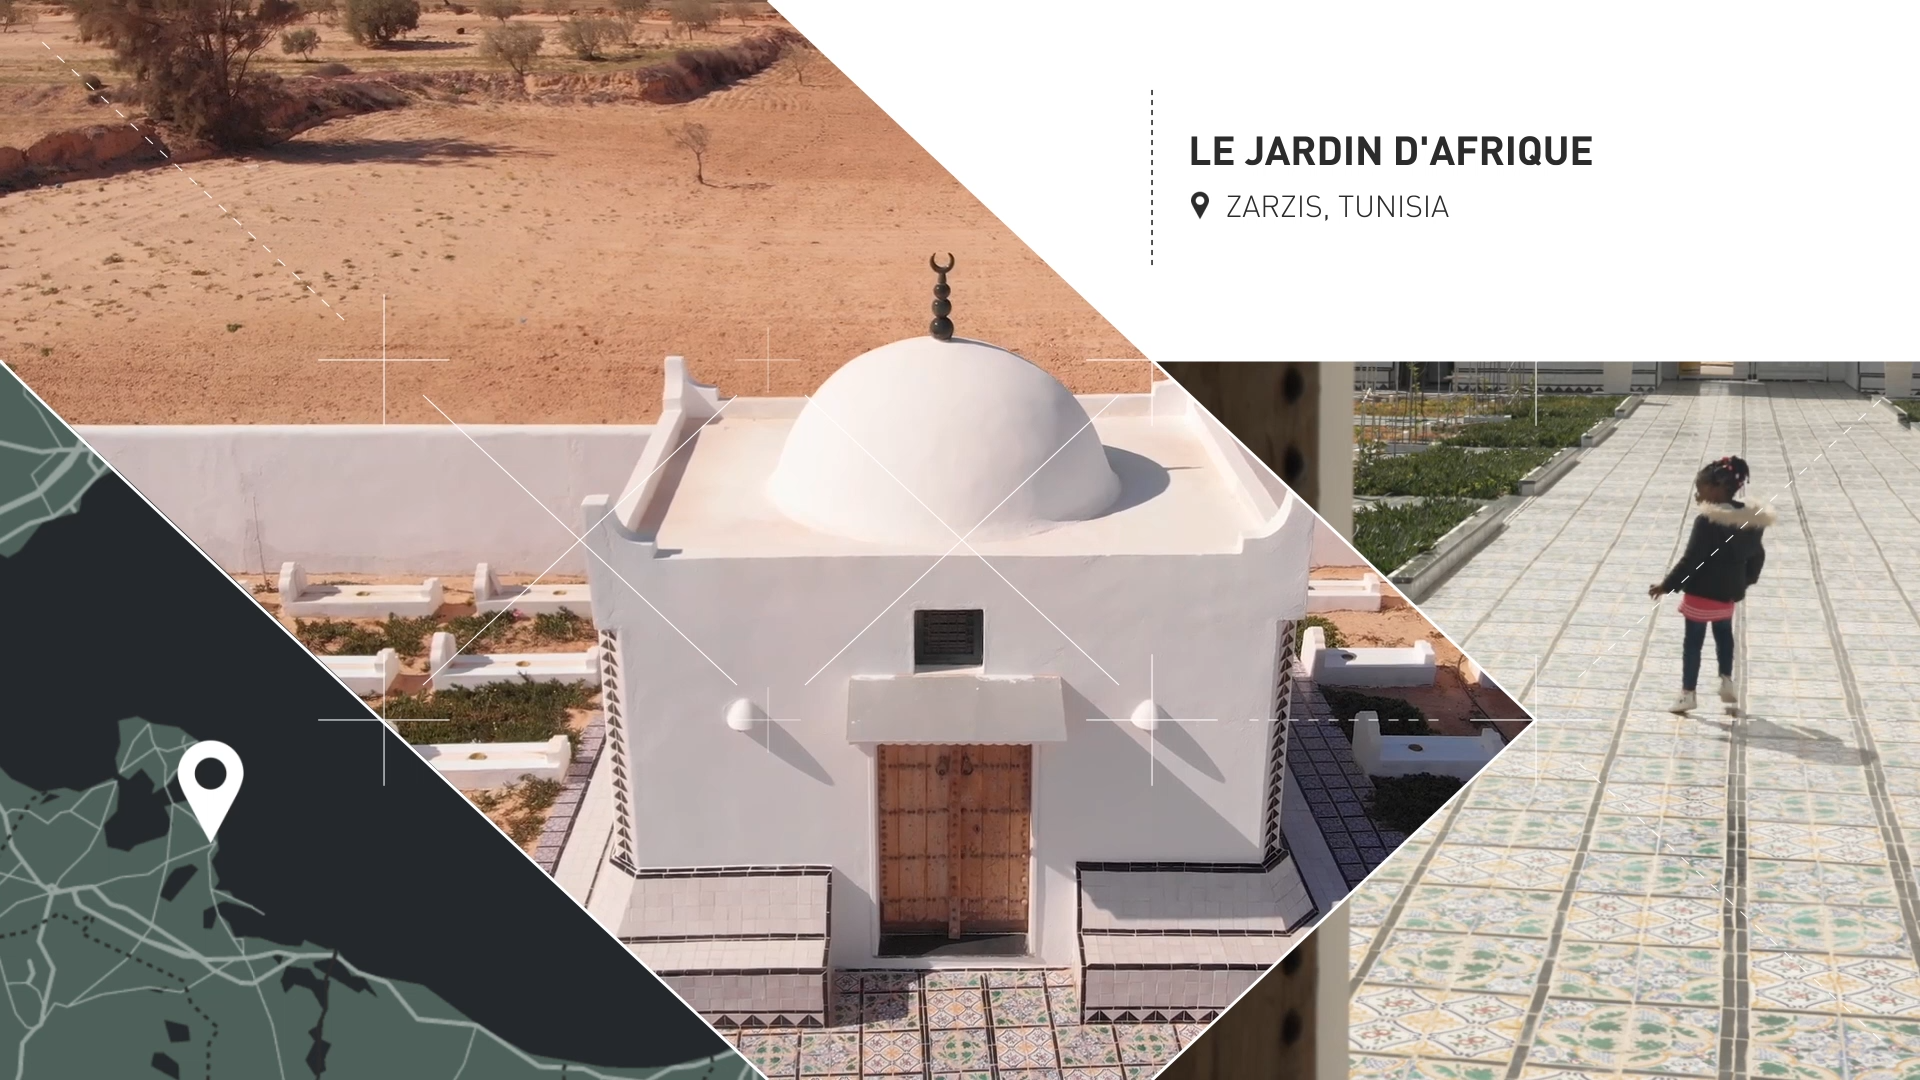 Jardin d'Afrique - <p>Le Jardin d'Afrique,&nbsp;Zarzis, Tunisia, by Rachid Koraïchi: An ecumenical cemetery provides a sanctuary and dignified place of final repose for the hundreds of unburied bodies that had been washing ashore.</p>